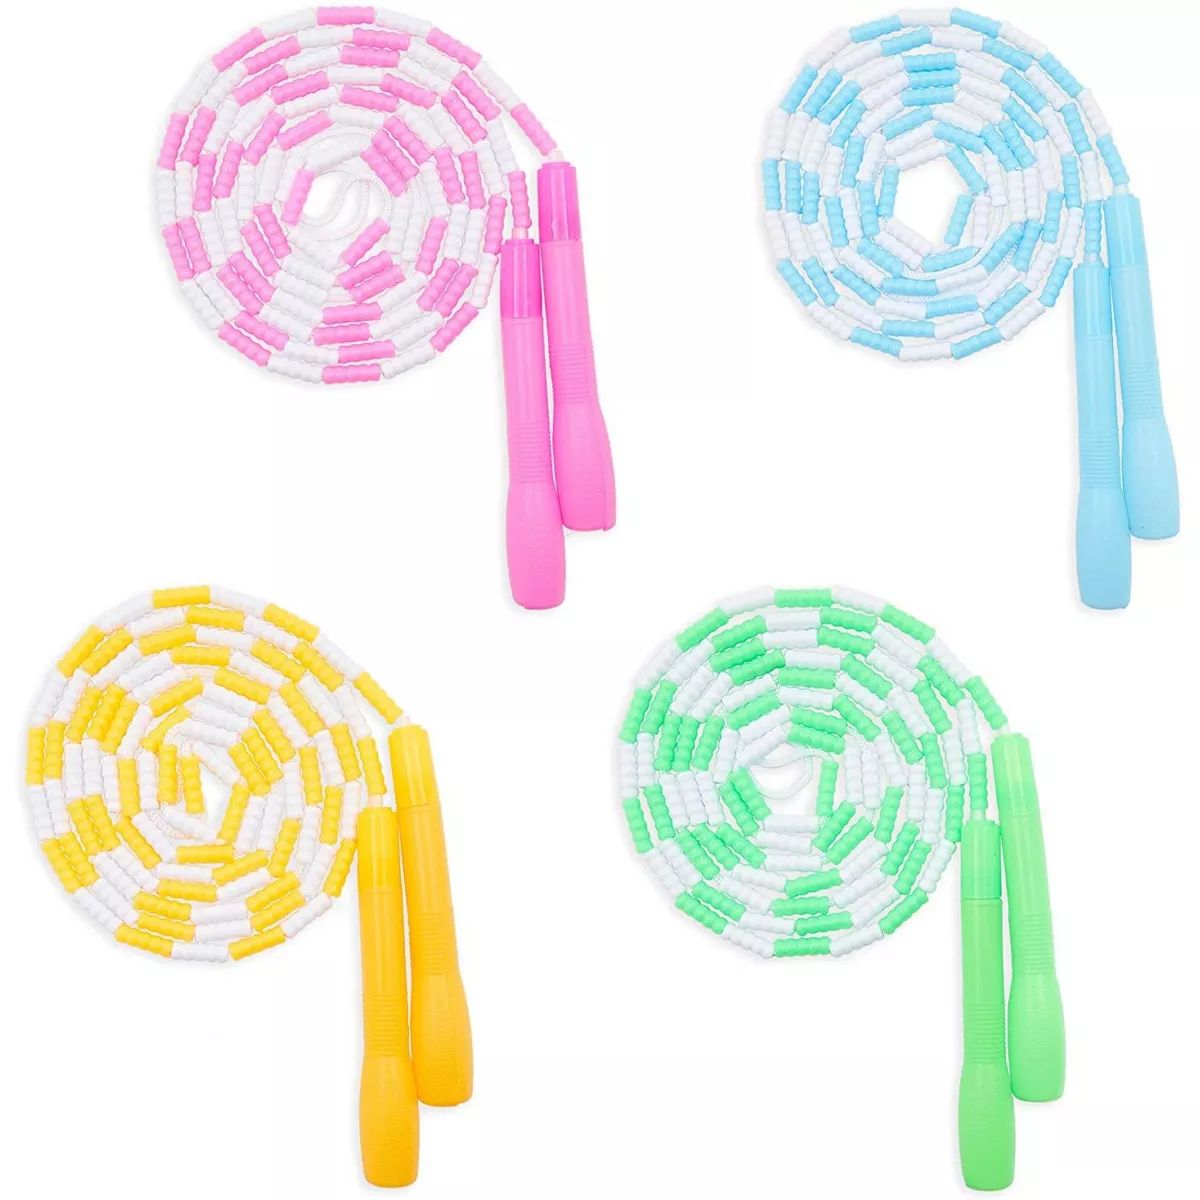 Blue Panda 4 Pack Beaded Jump Rope for Kids, 4 Colors Skipping Toys (9.2 Feet) | Target